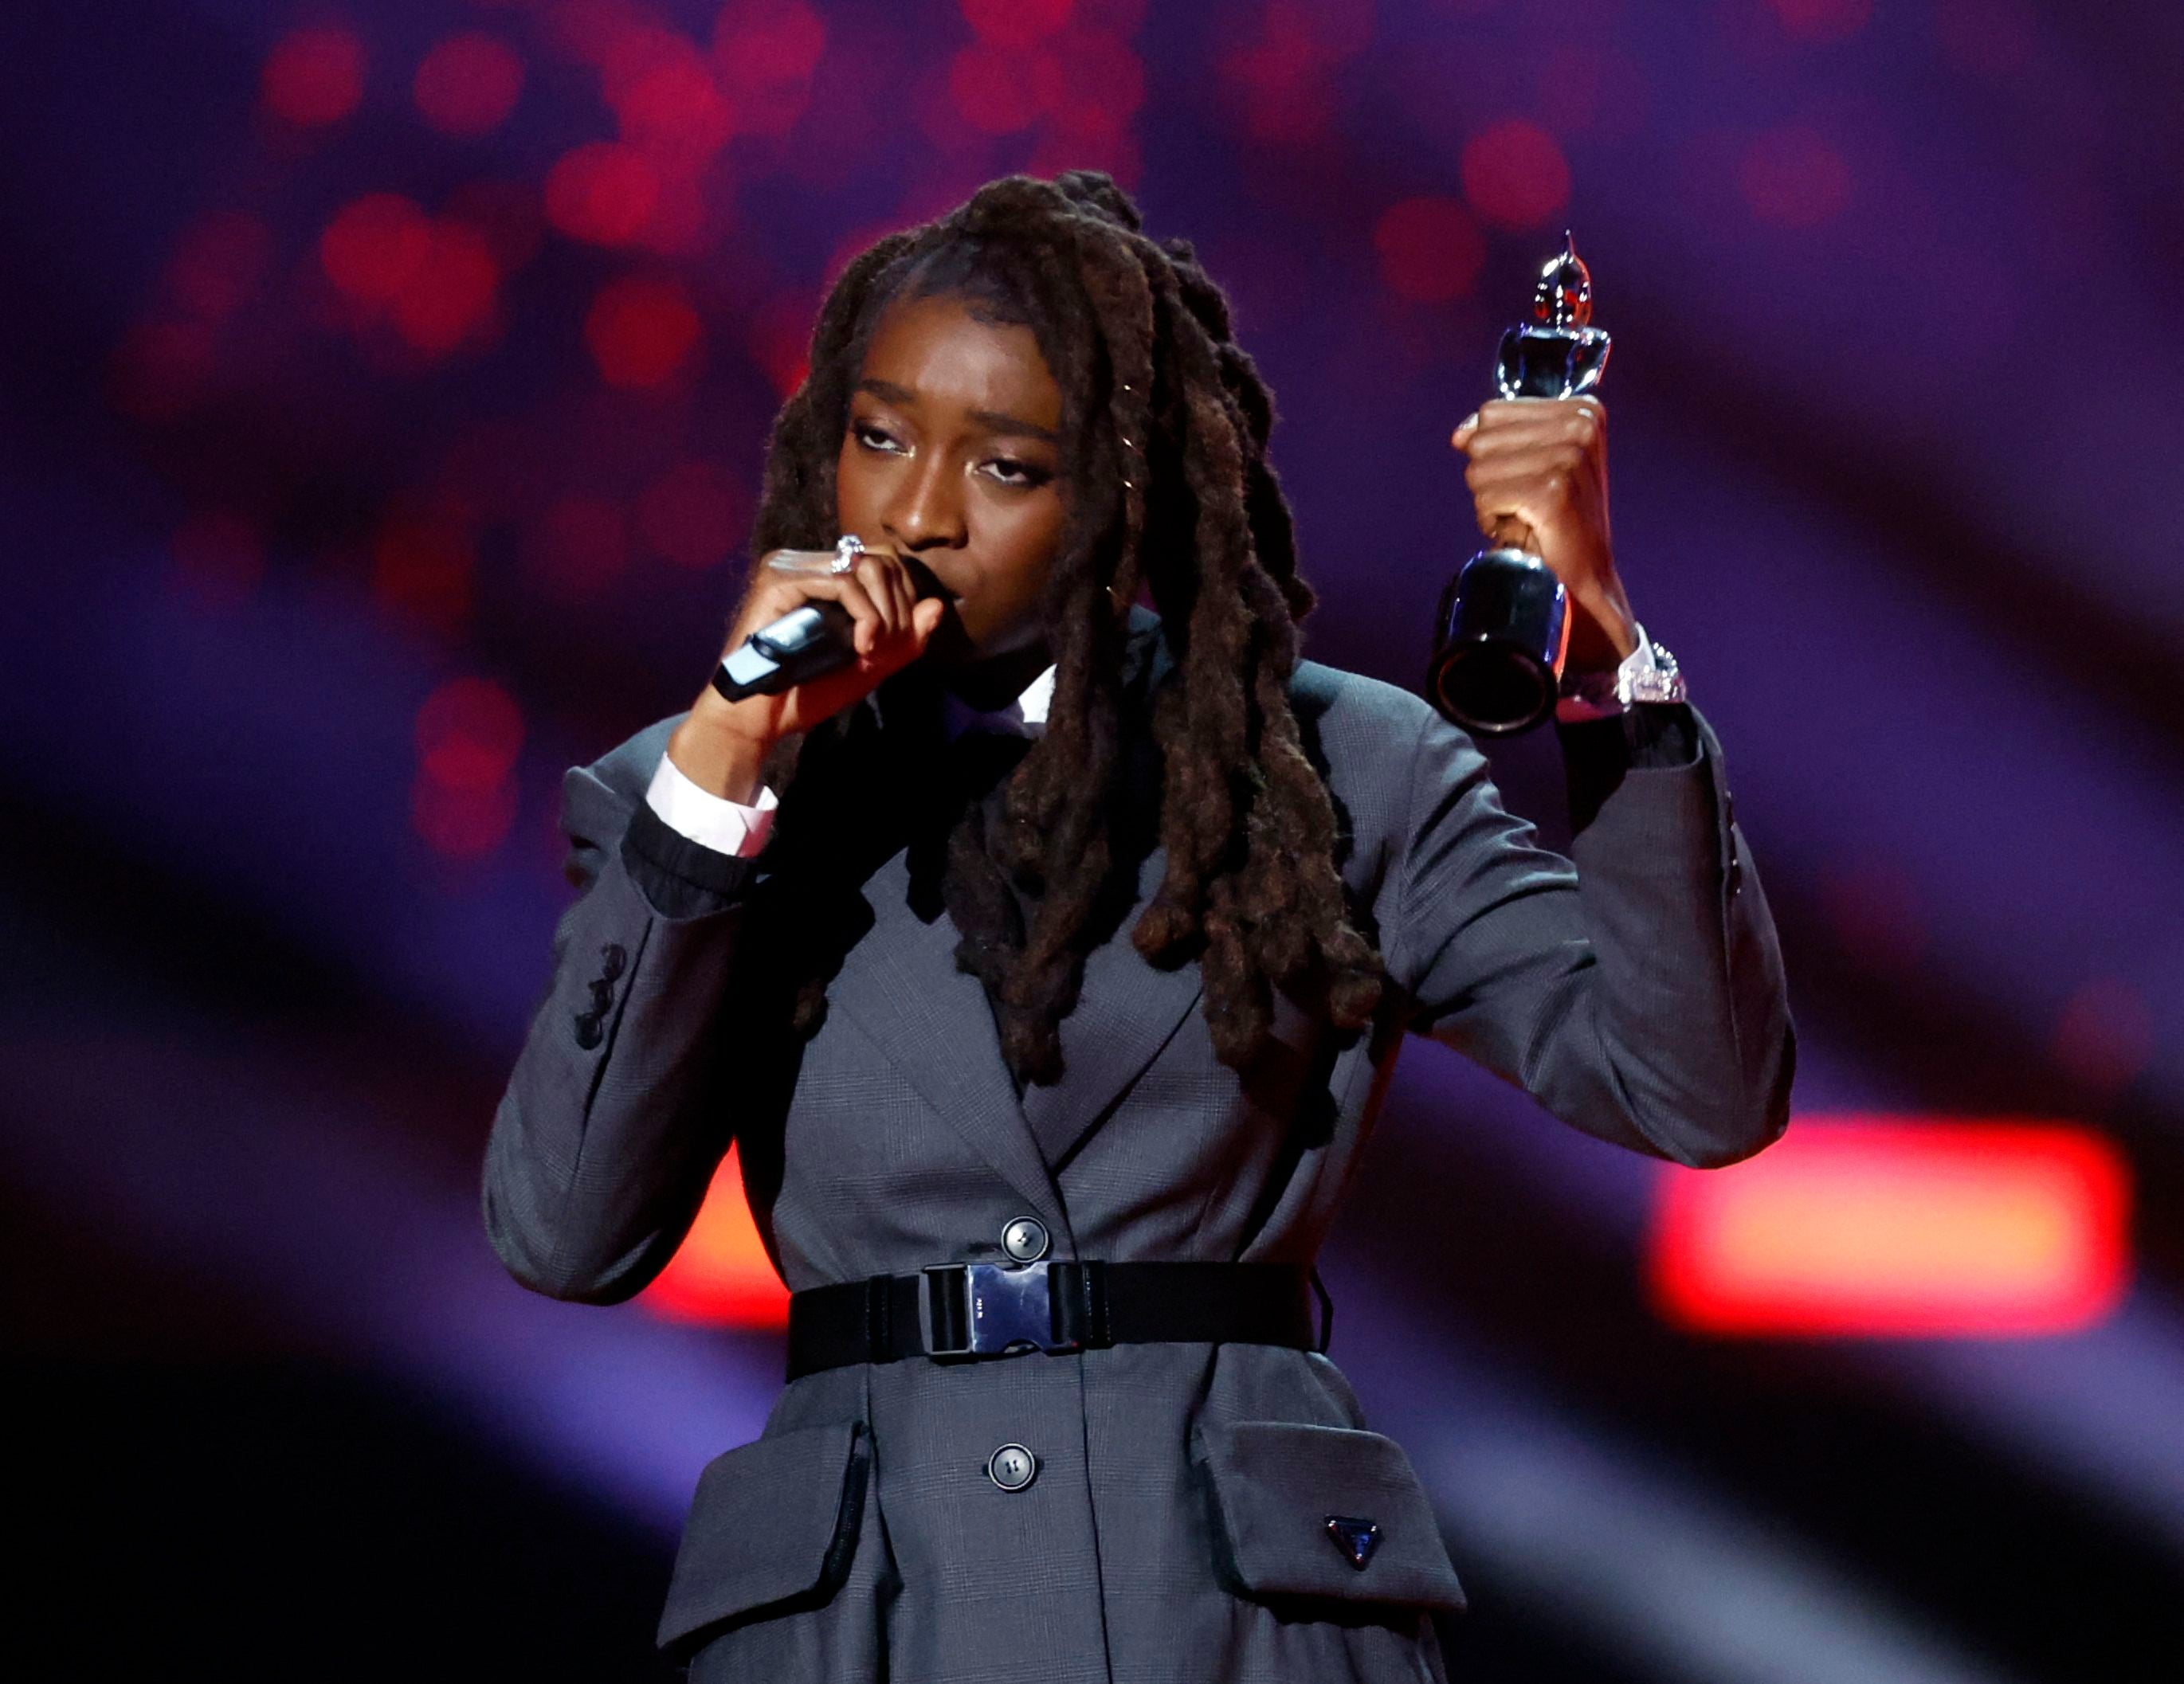 Little Simz also received the award for Best New Artist at the Brit Awards 2022